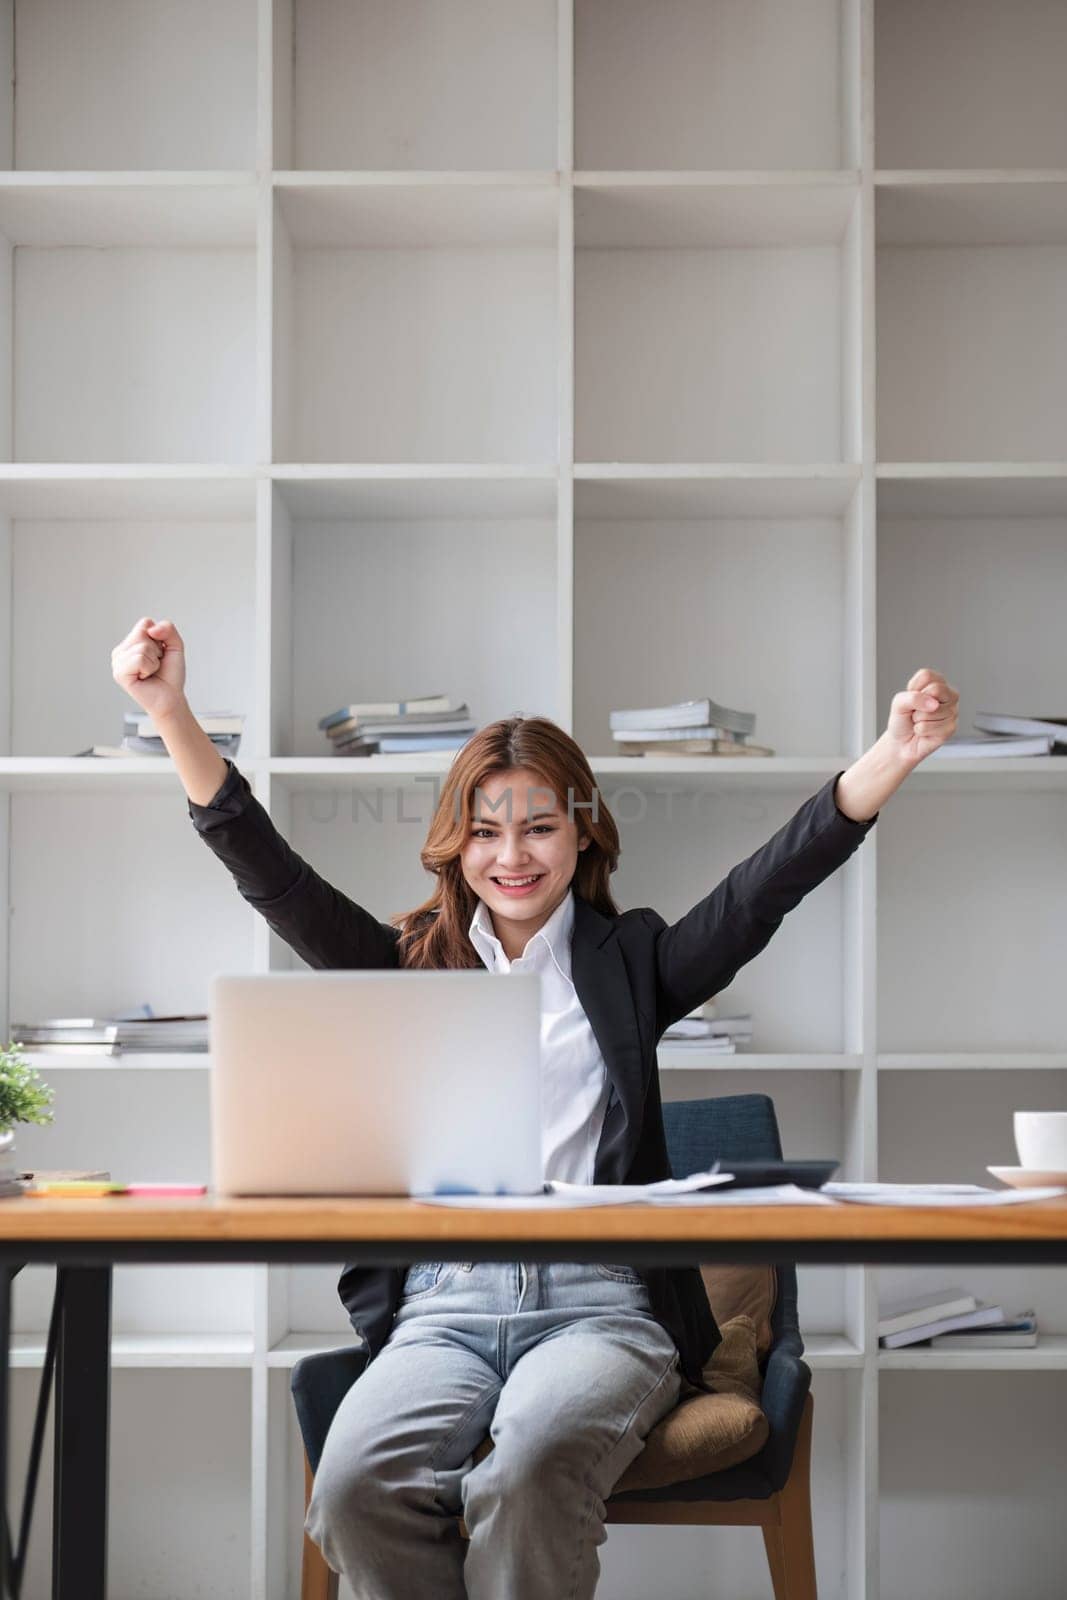 Excited female feeling euphoric celebrating online win success achievement result, young woman happy about good email news, motivated by great offer or new opportunity, passed exam, got a job..